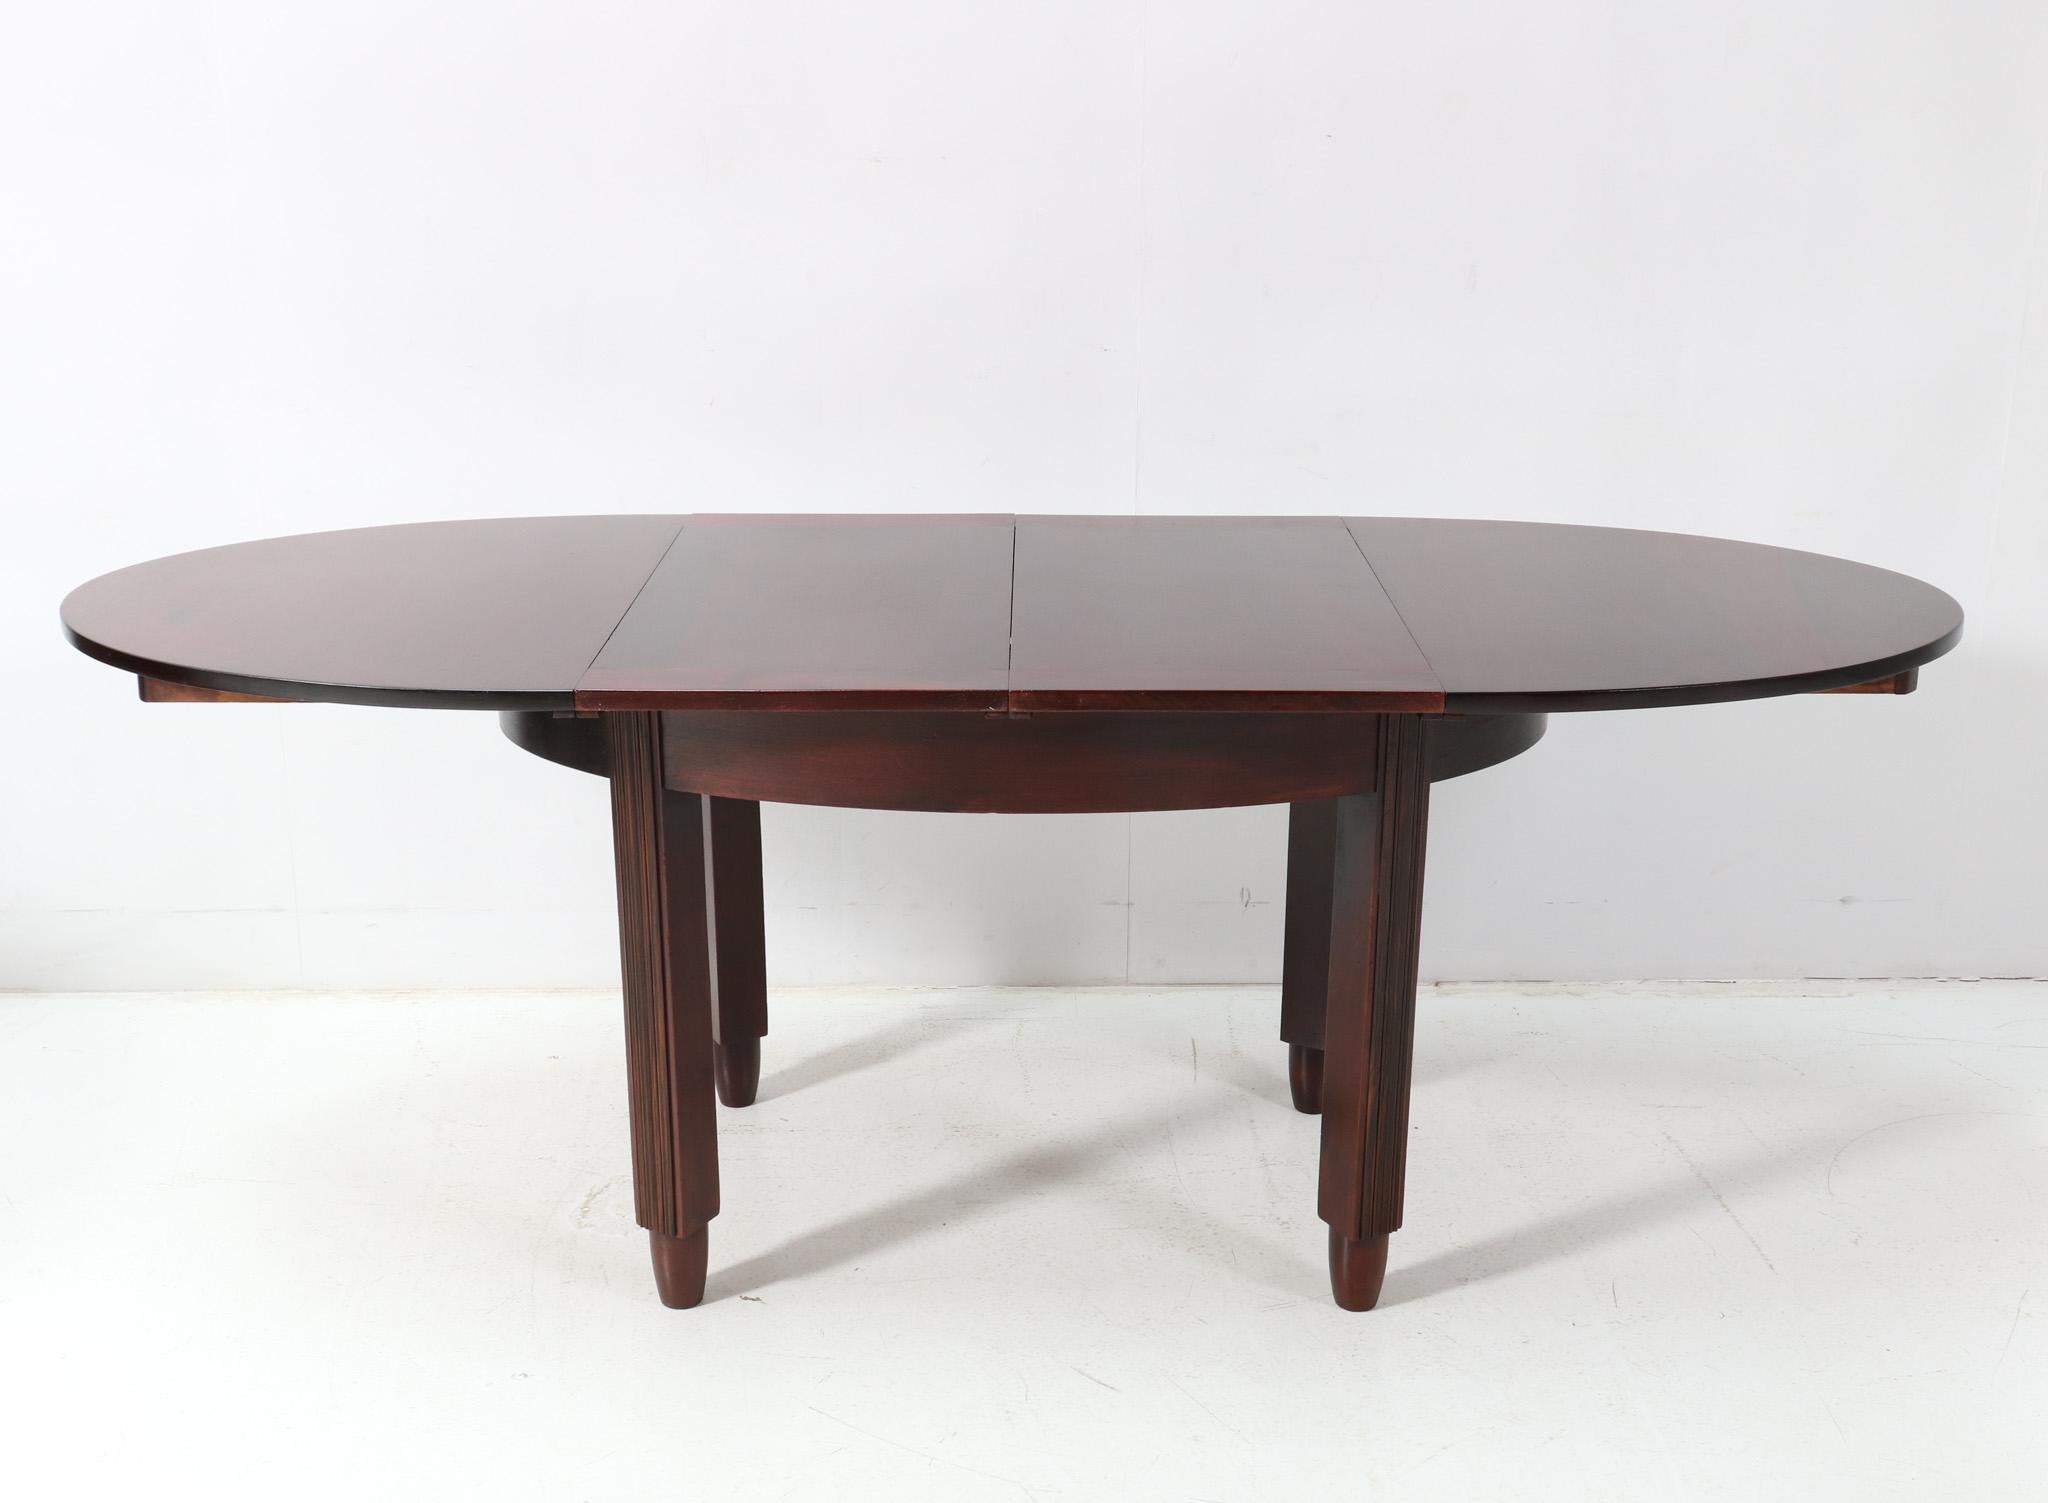 Macassar Walnut Art Deco Amsterdamse School Extendable Dining Room Table by Fa. Drilling For Sale